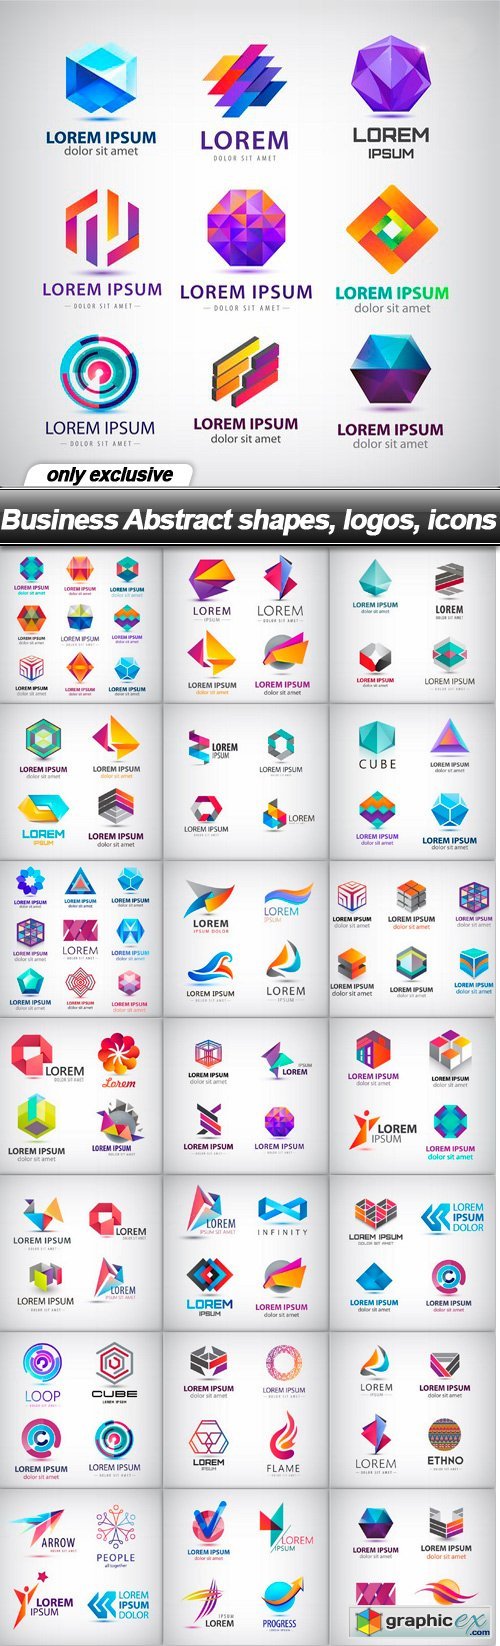 Business Abstract shapes, logos, icons - 22 EPS